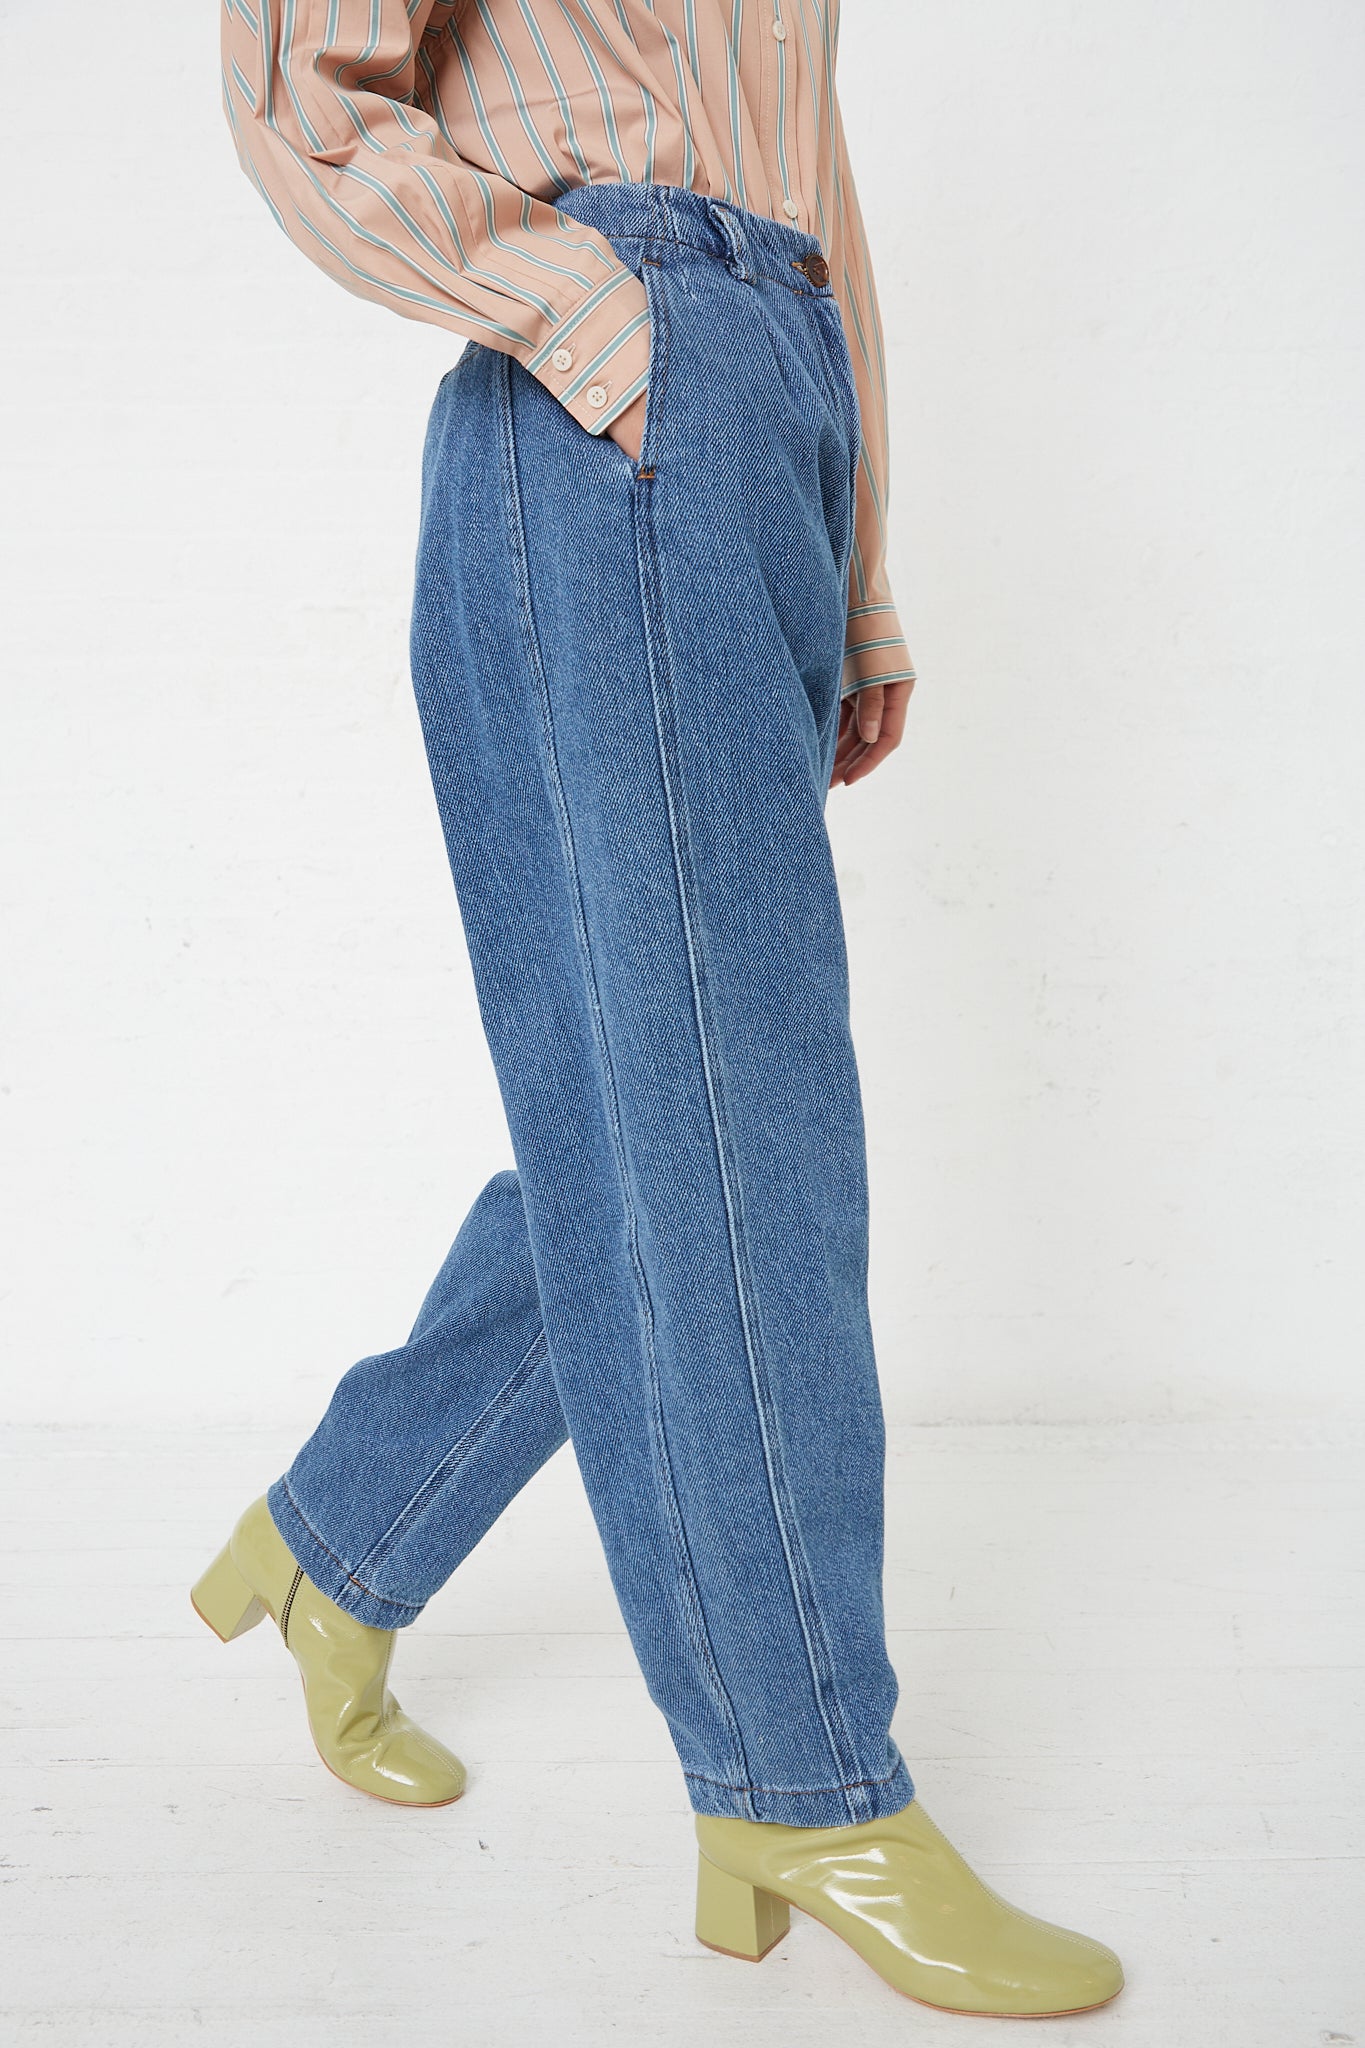 A woman wearing a pair of Rachel Comey Denim Percy Pant in Indigo, in a relaxed fit pant with green shoes.